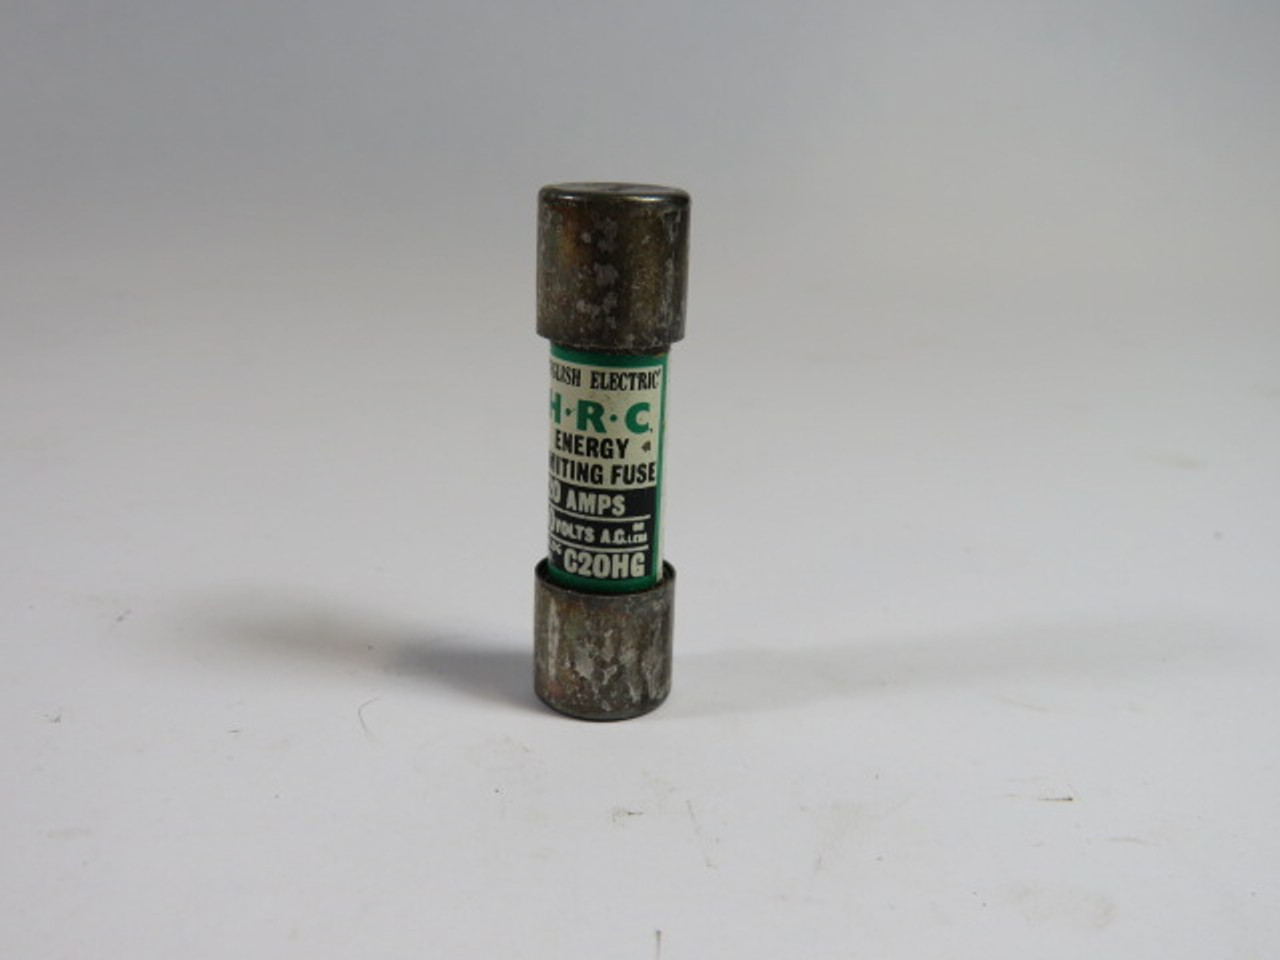 English Electric C20HG HRC Fuse 20A 250VAC Lot of 10 USED